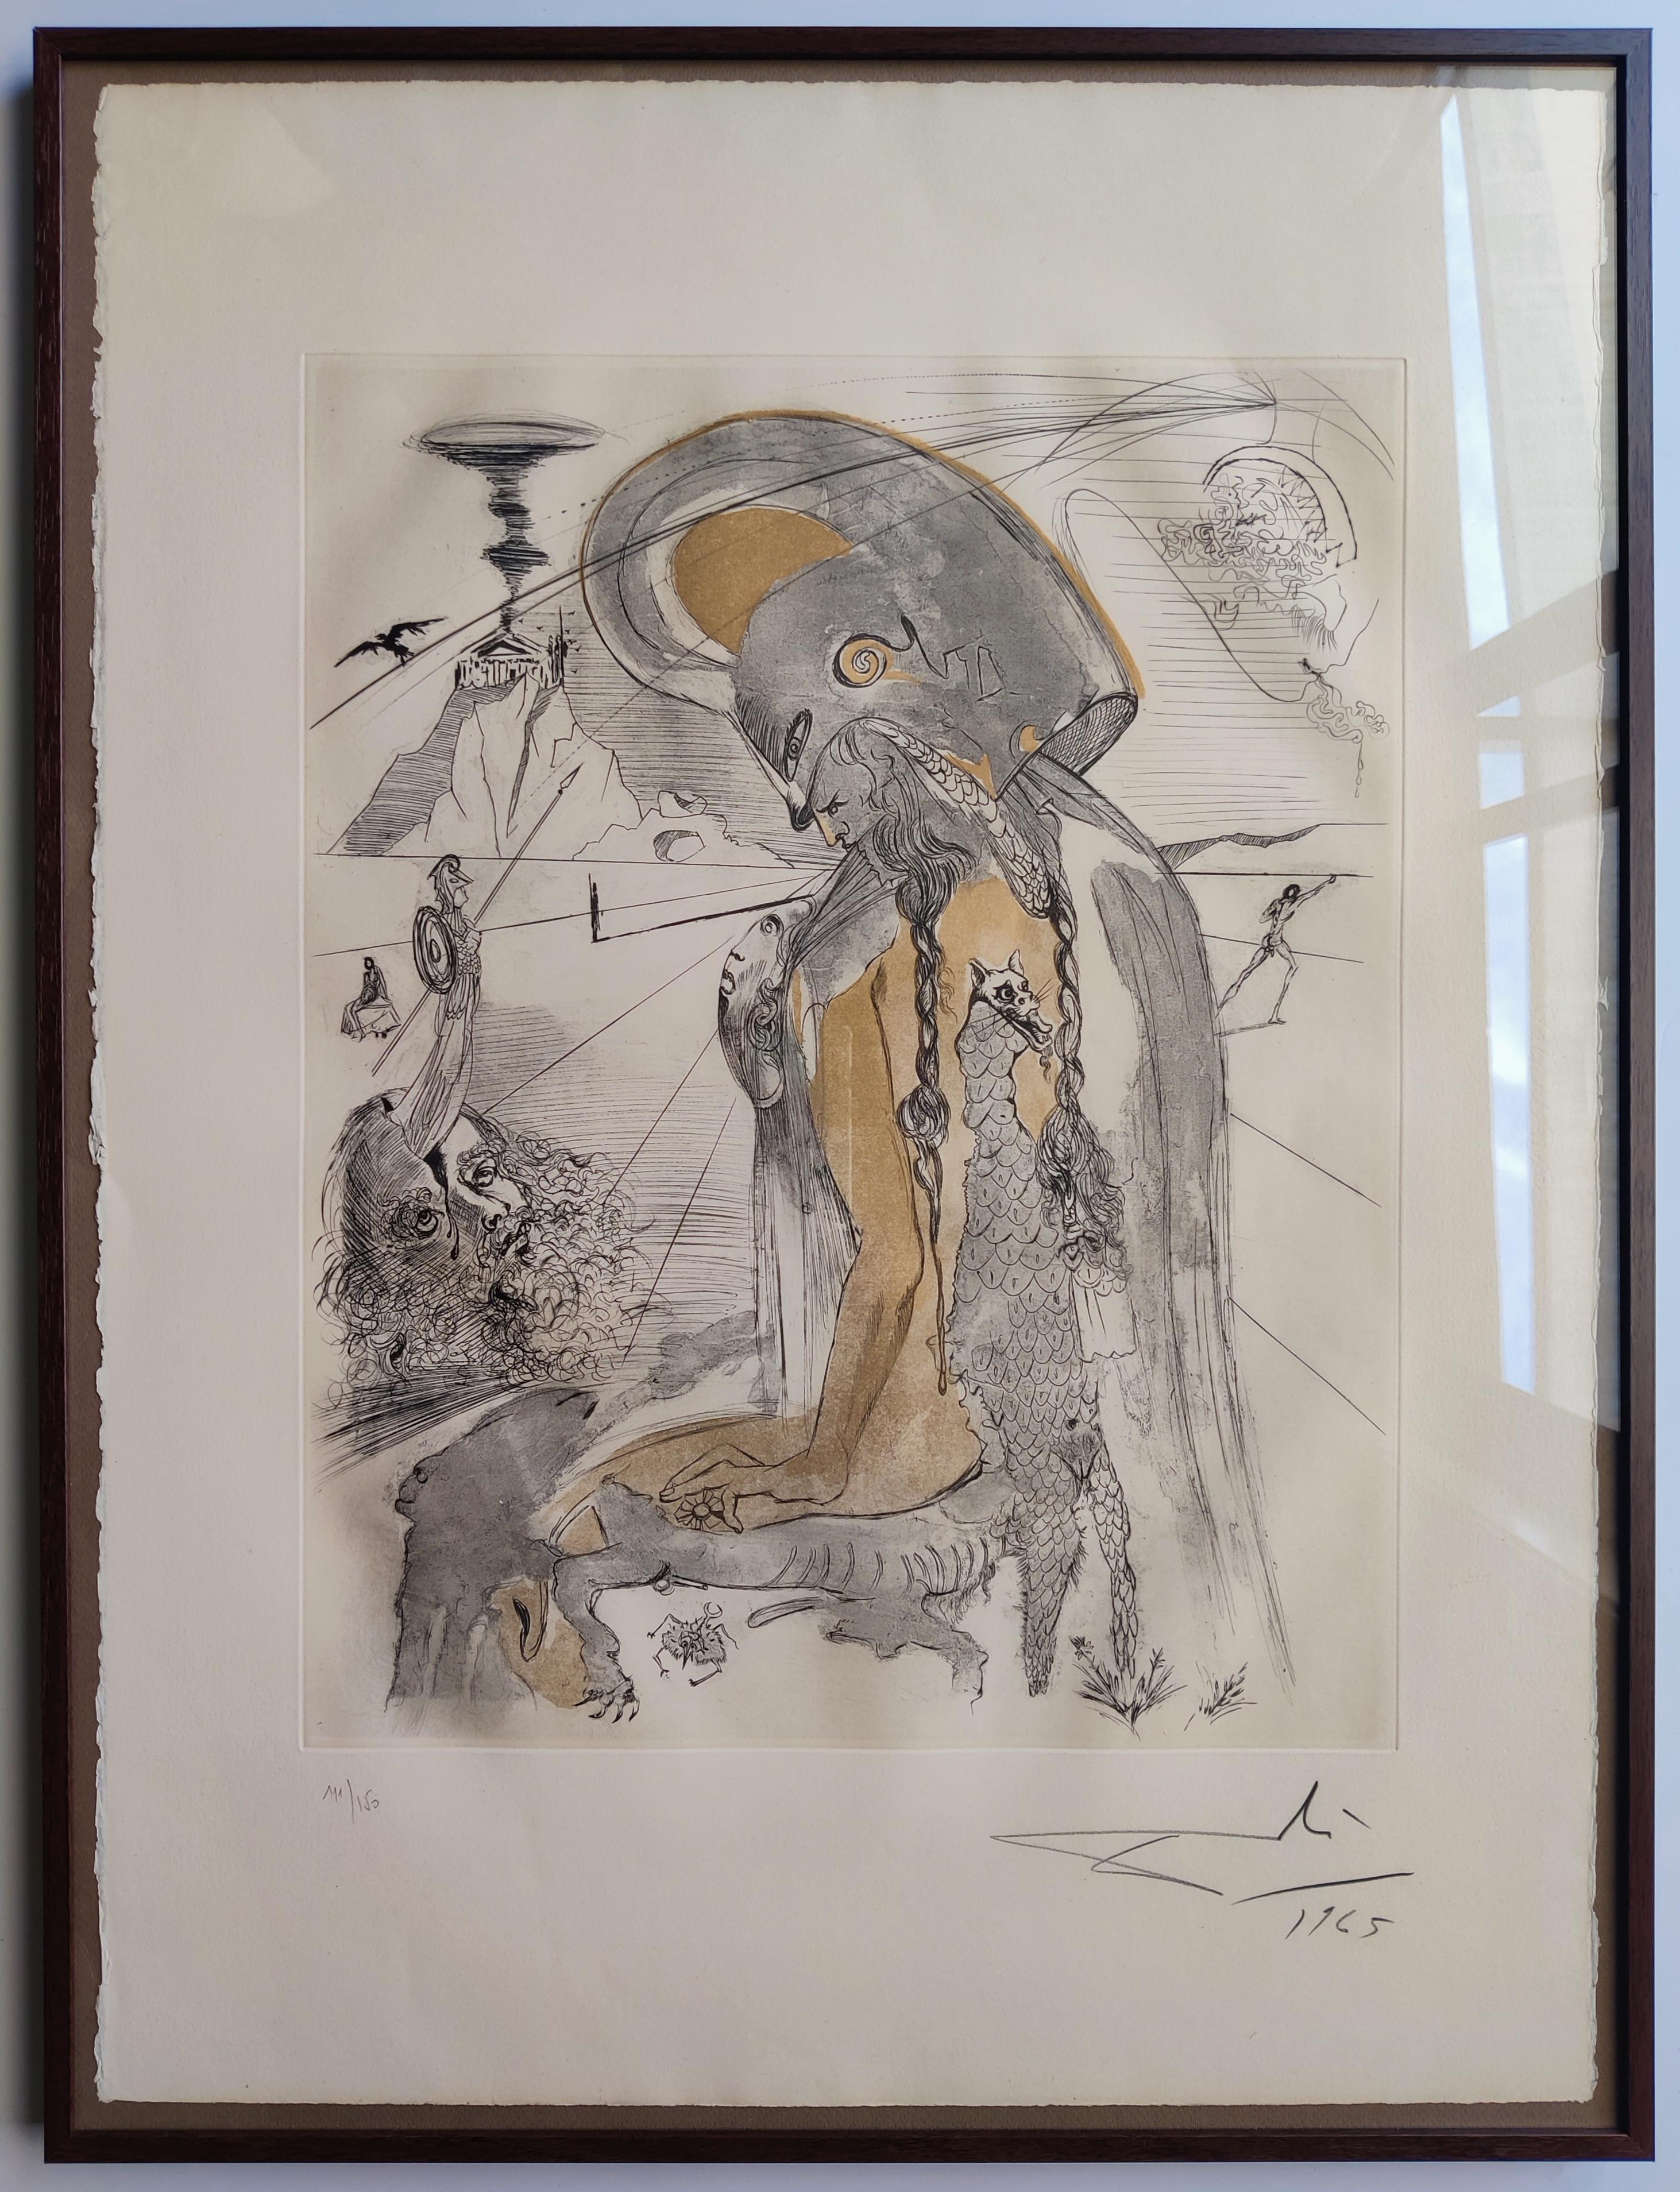 Salvador Dalí 

"Athene" from the series "Mythologie".  1965
Coloured etching, 
Signed and dated low right 
Edition number: 111/150
Literature  Michler & Löpsinger cat. 130.
Plate. 52.5 x 42 cm
Frame 80 x 61 x 2.5 cm
Framed with the wooden style